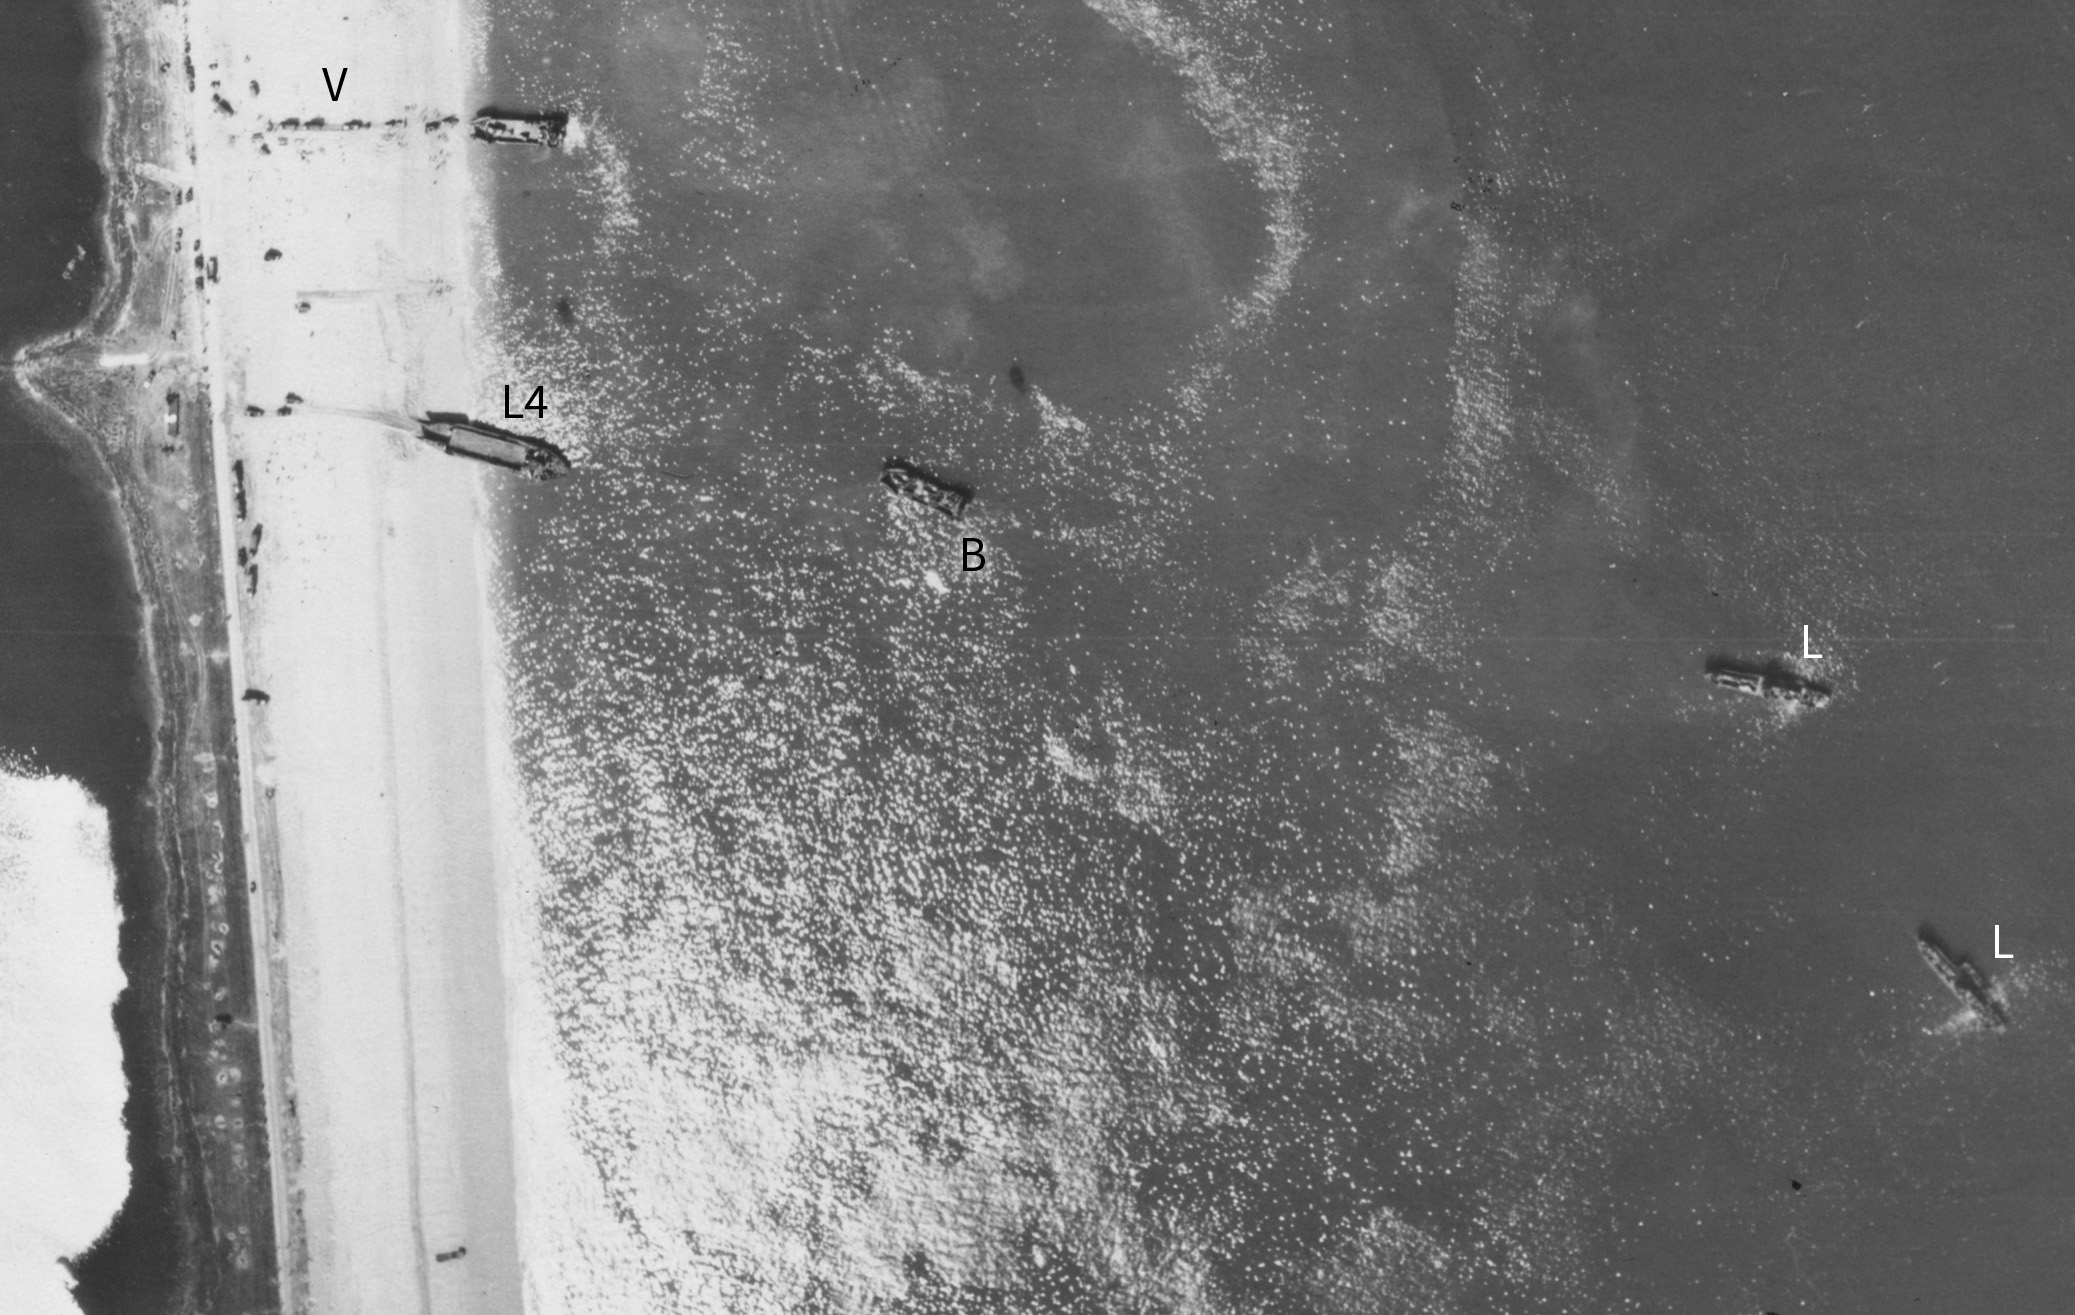 Detail from a black and white vertical aerial photograph, showing a narrow strip of beach between an inland pool of water and the sea. Two landing craft are stationary at the edge of the beach. A line of vehicles are on the beach next to the open doors of one of the landing craft. Vehicle tracks on the sand lead from the second landing craft to vehicles further up the beach. Other vehicles are dotted on the beach. At sea are three other vessels. One appears to have a barrage balloon tethered to it. Sunlight illuminates the water towards the bottom-left of the image. The letters and numbers 'V', 'L4', 'B' and 'L' applied to the image mark locations.